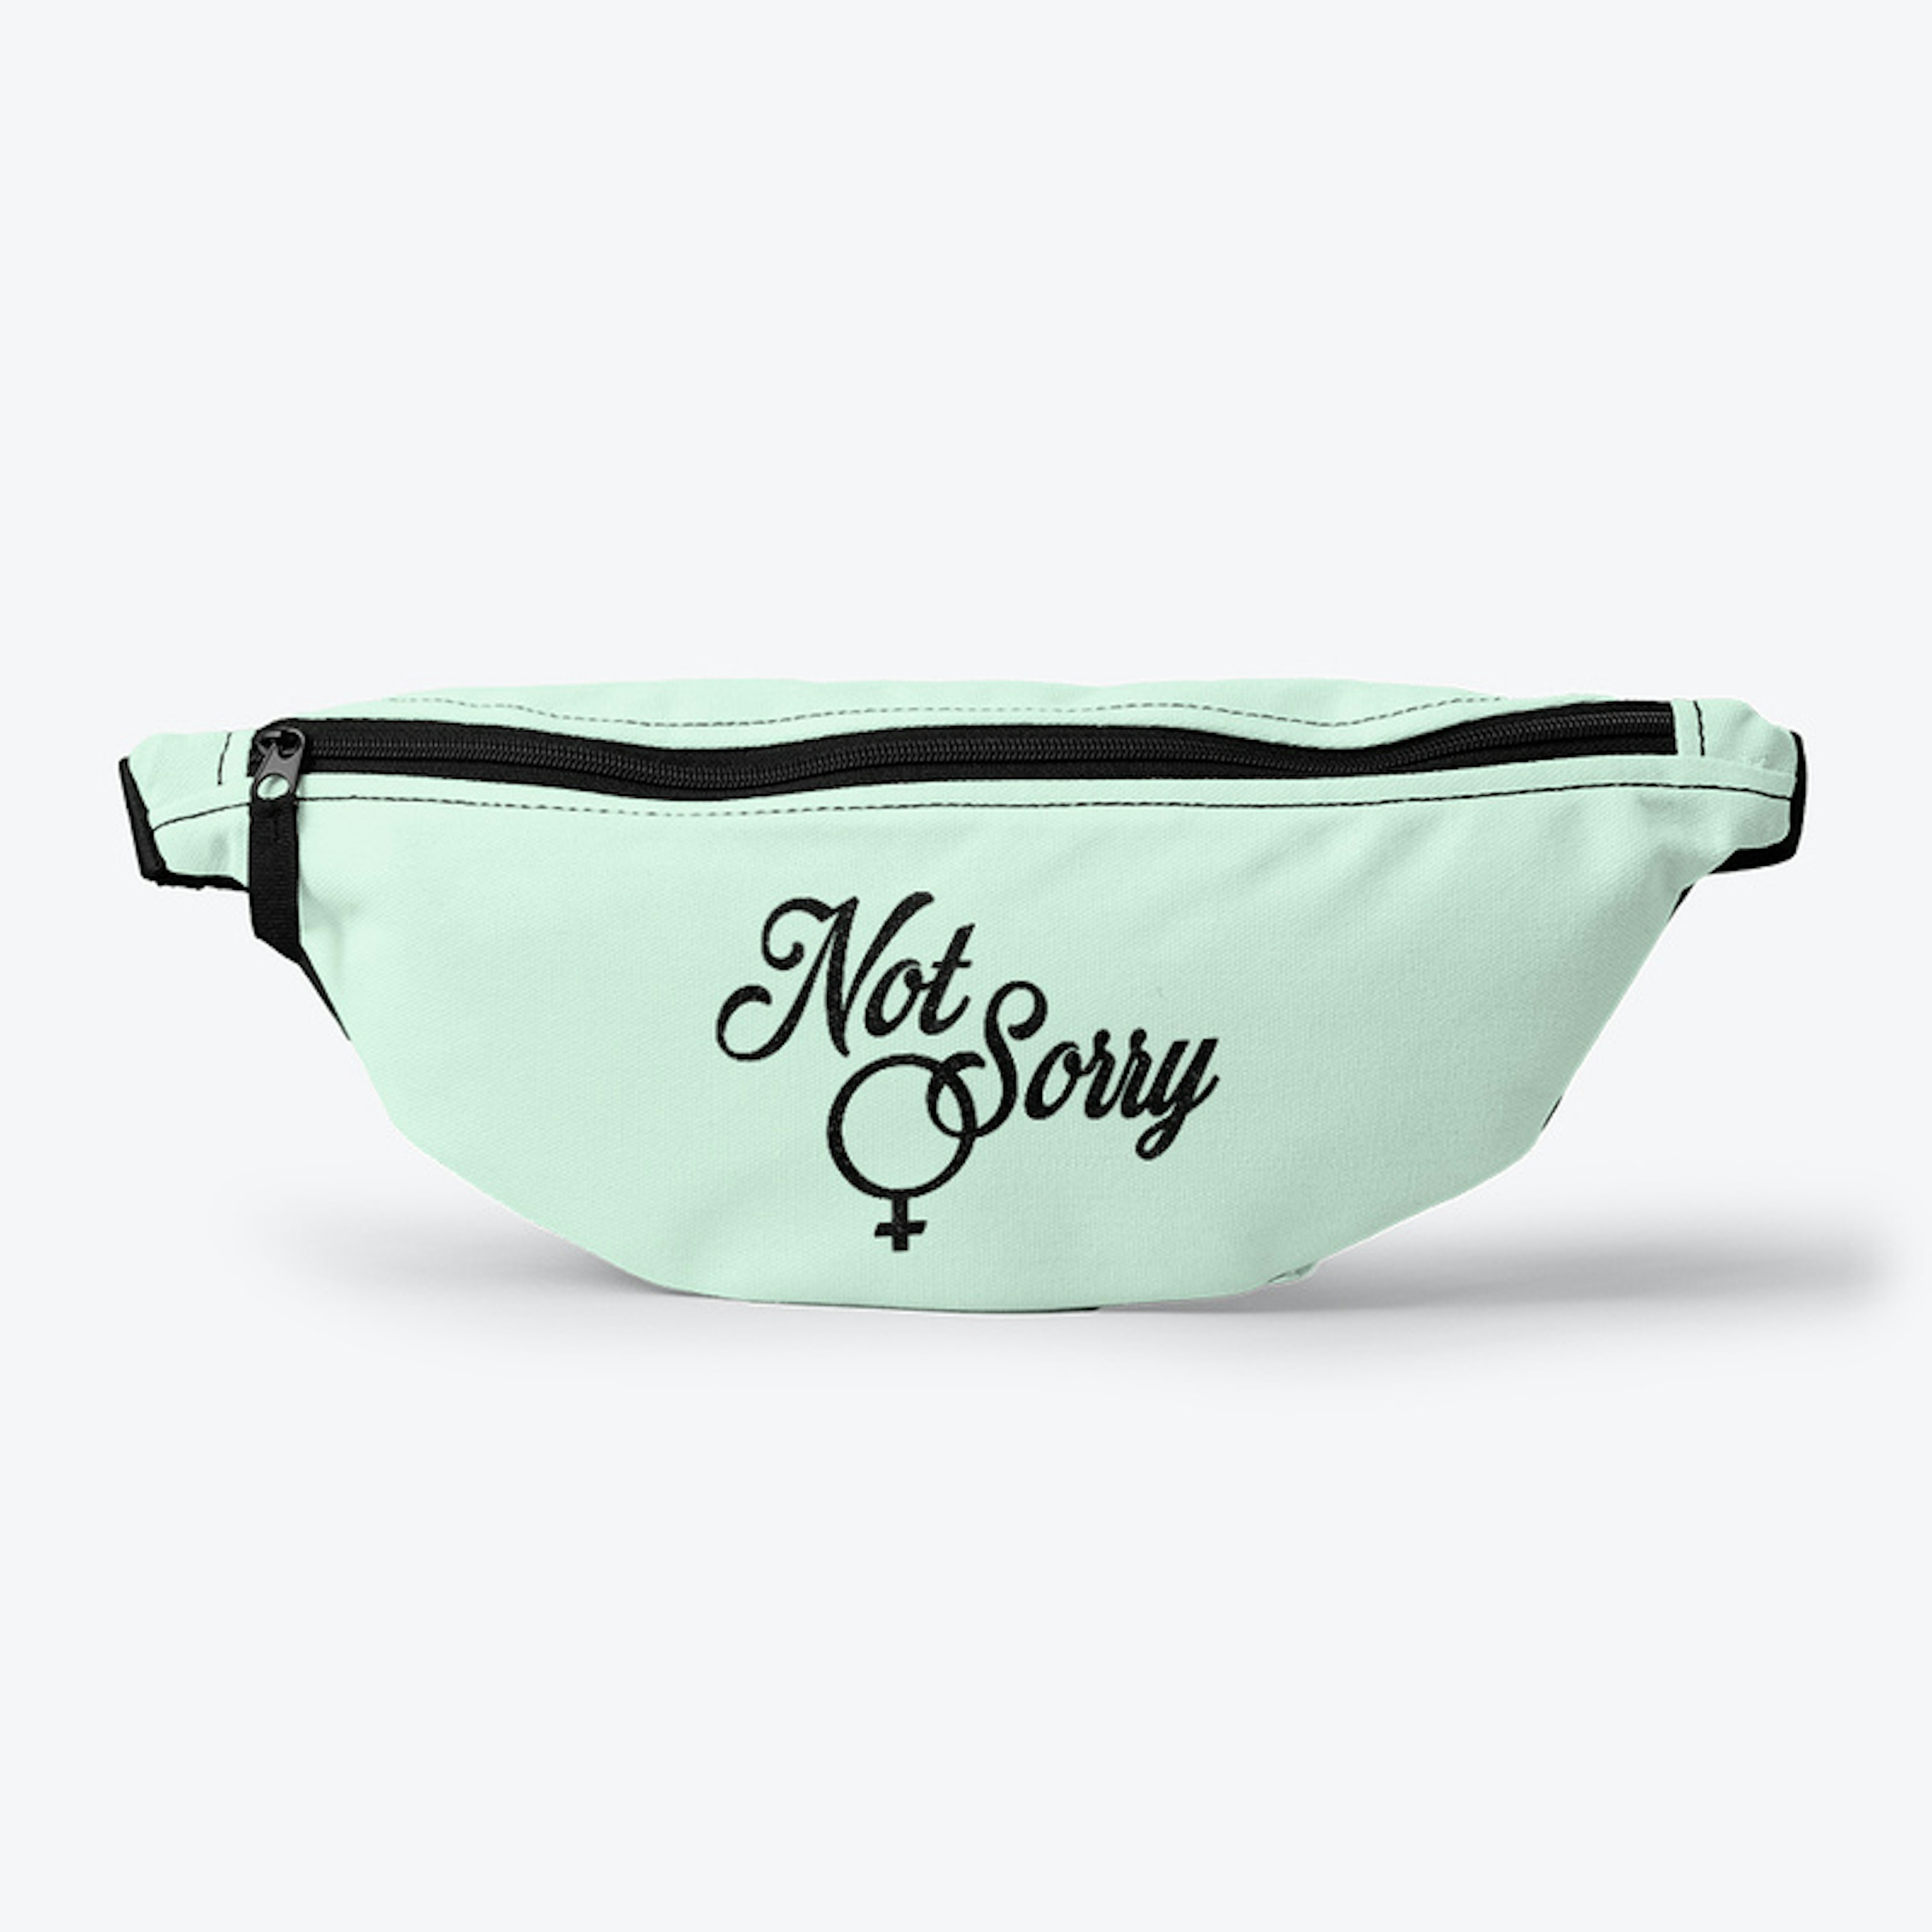 Not Sorry fanny pack